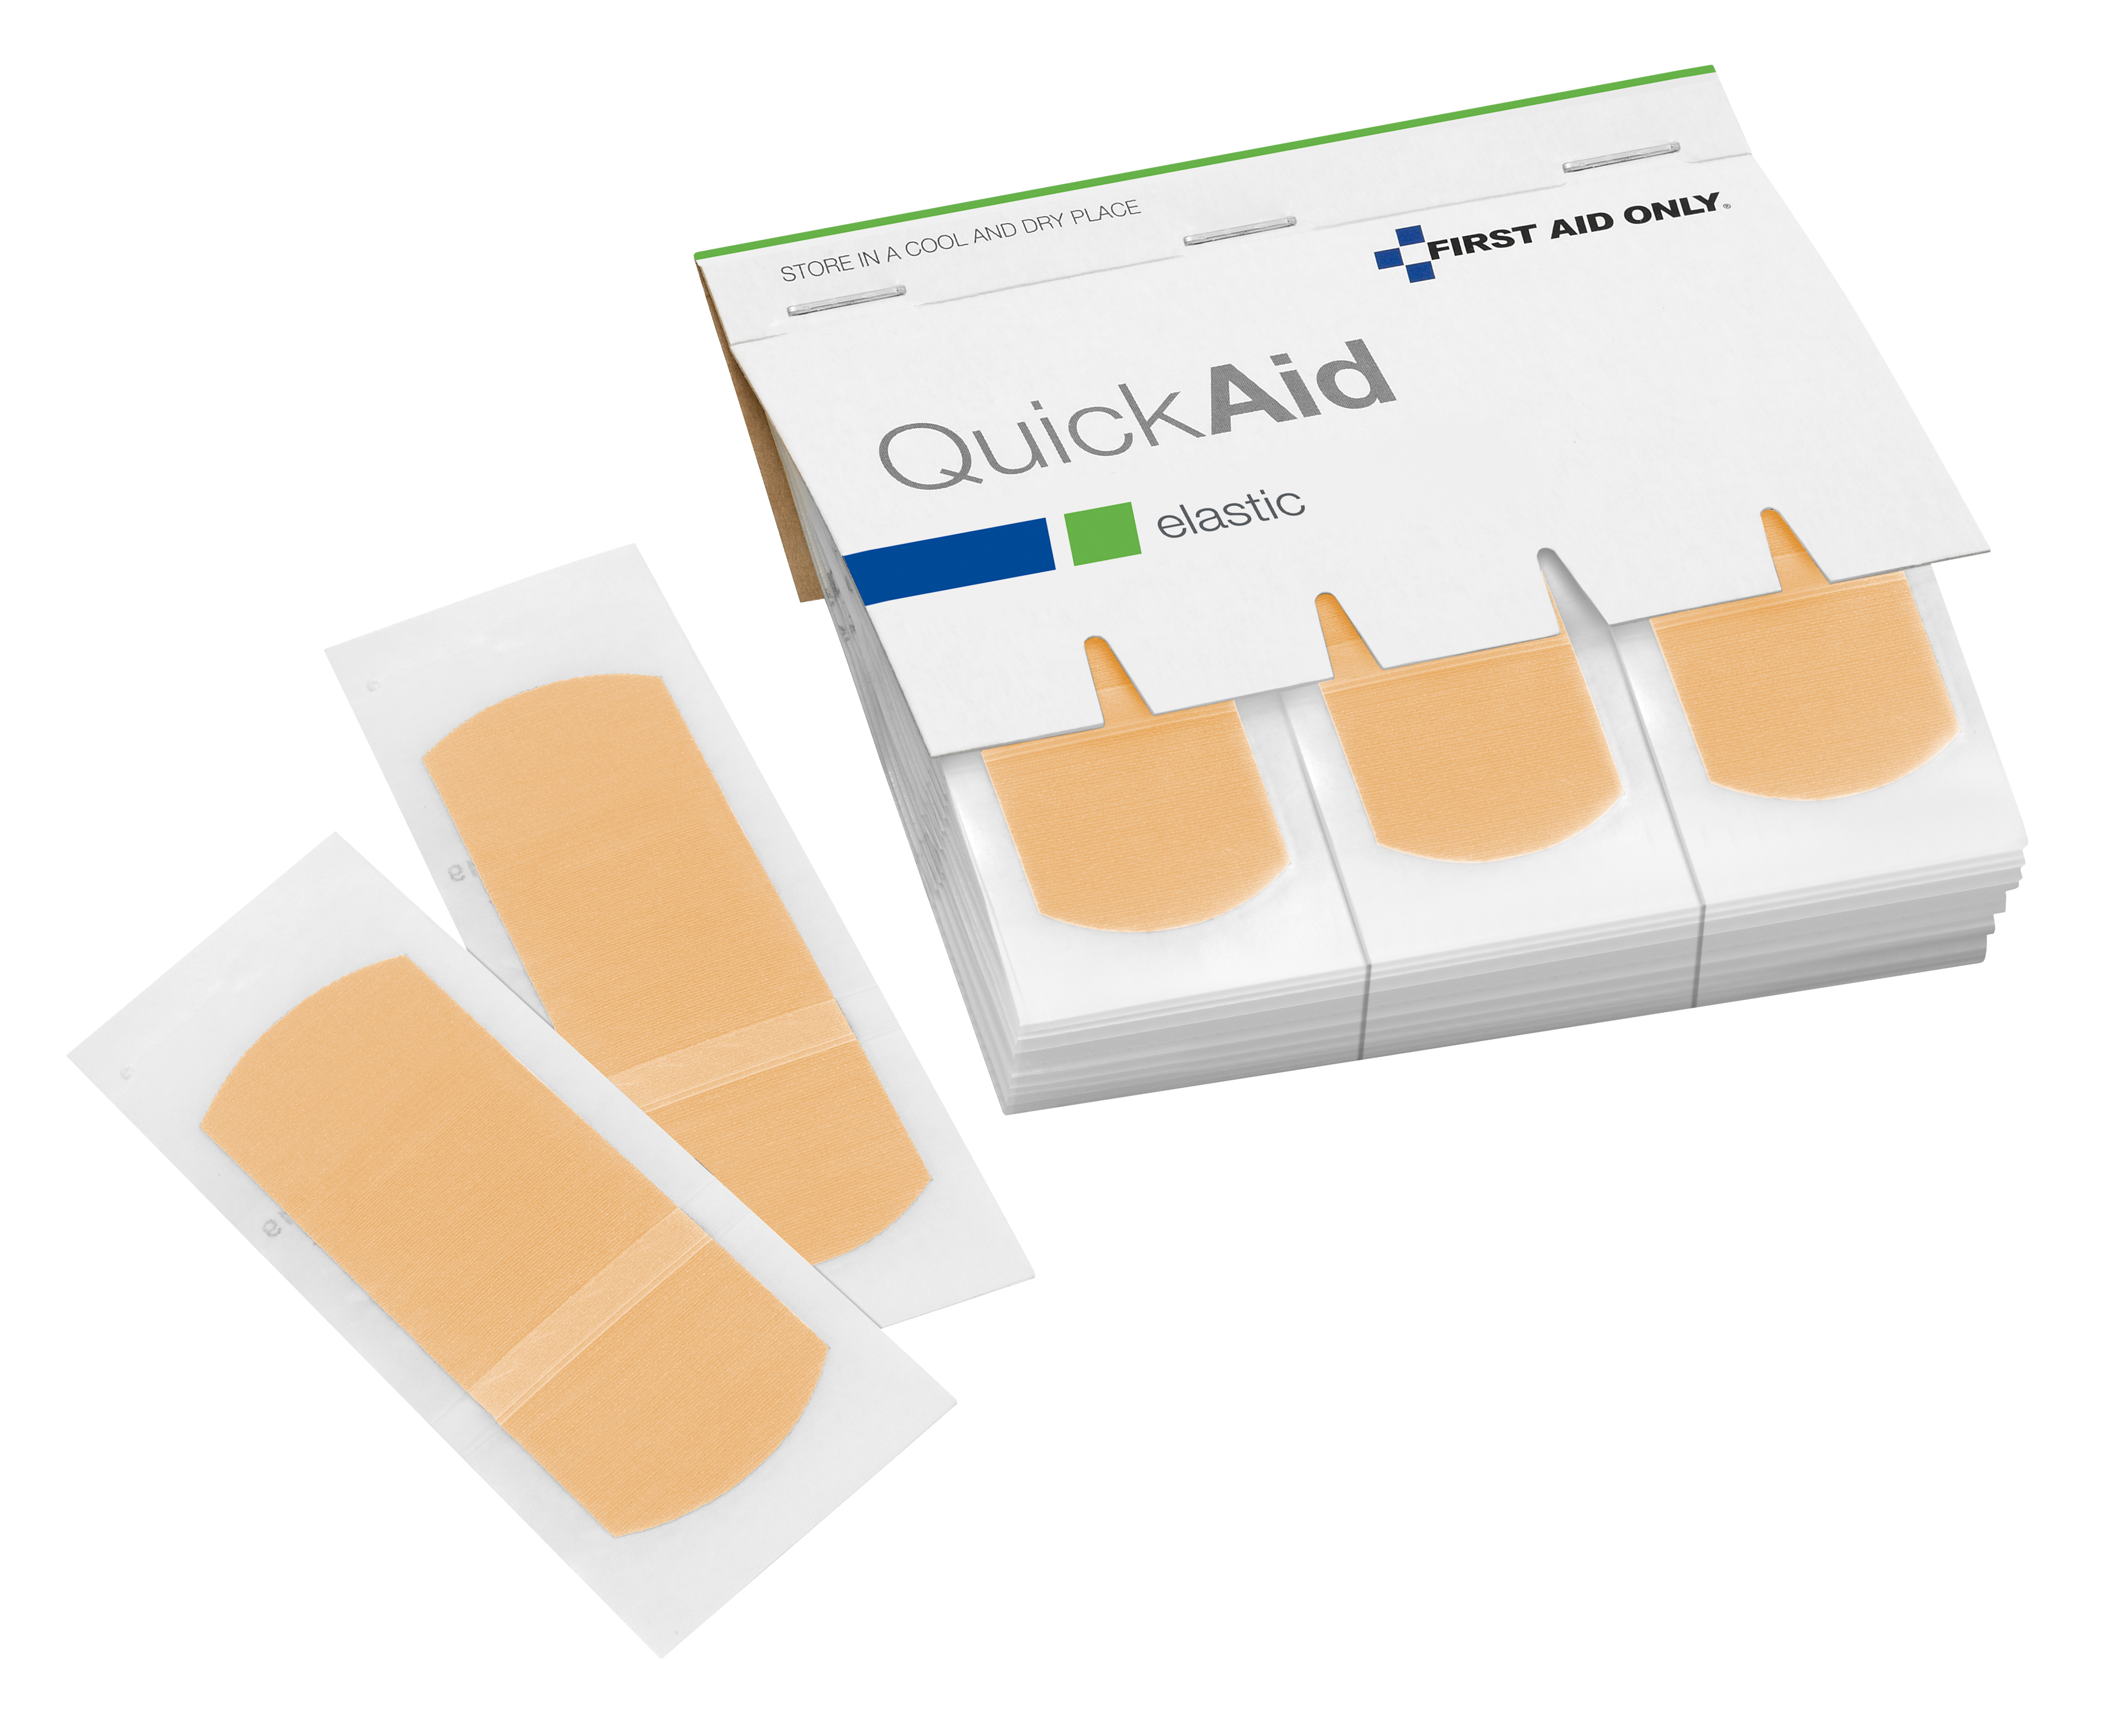 FIRST AID ONLY Sparadrap Elastic P-44006 00 45 pcs.